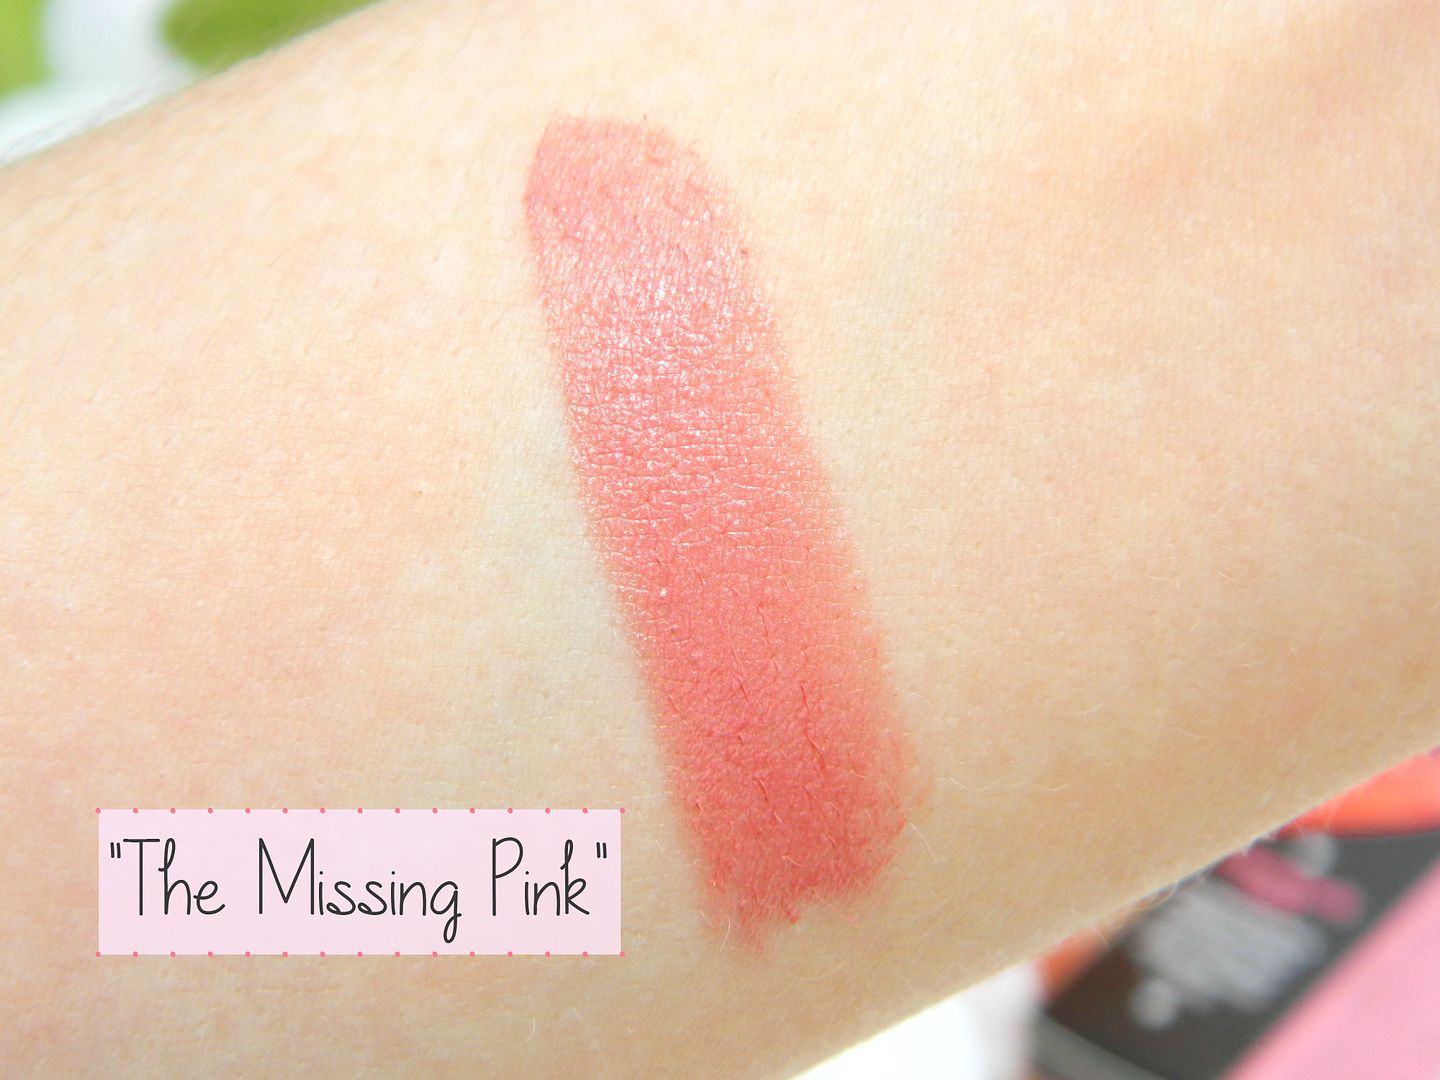 Soap And Glory Super Colour Fabu Lipstick In The Missing Pink Satin Finish Review Swatch On Skin Belle Amie UK Beauty Fashion Lifestyle Blog